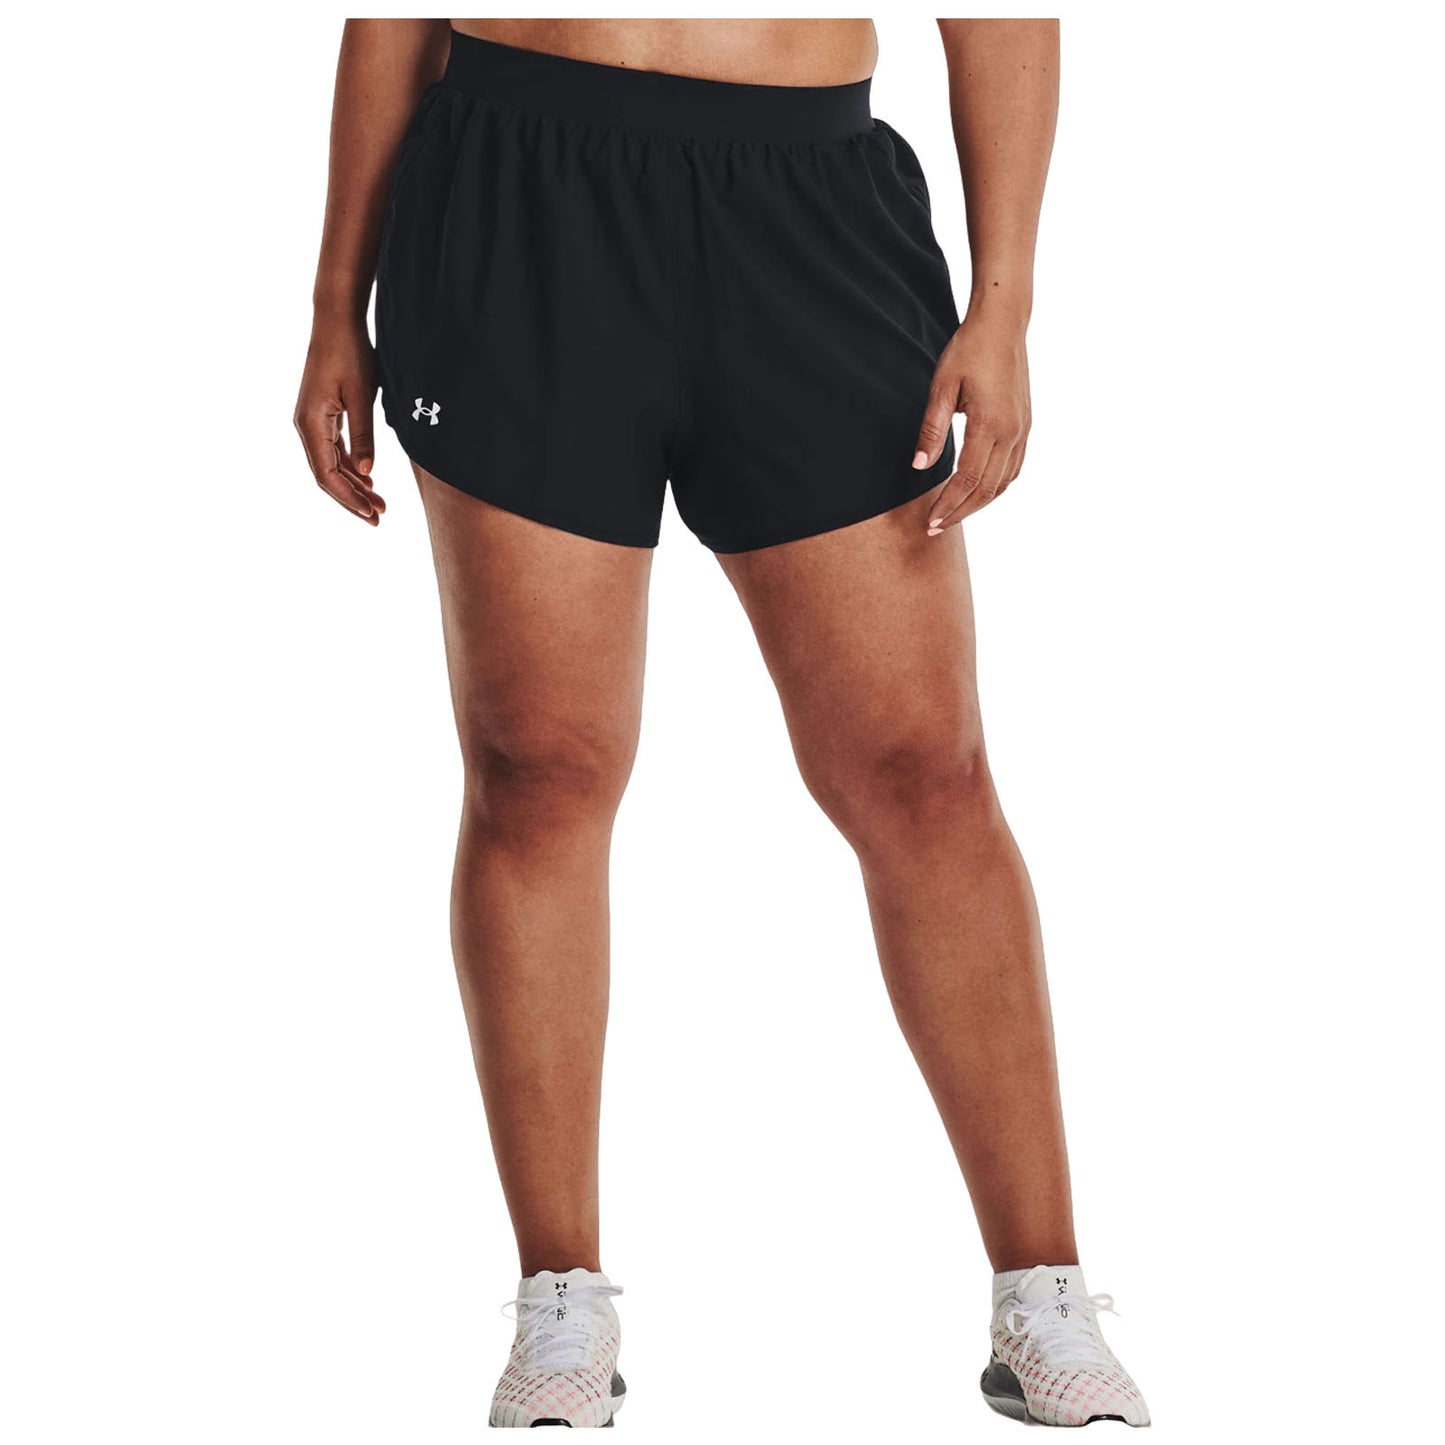 Under Armour Ladies Plus Size Fly-By 2.0 Shorts